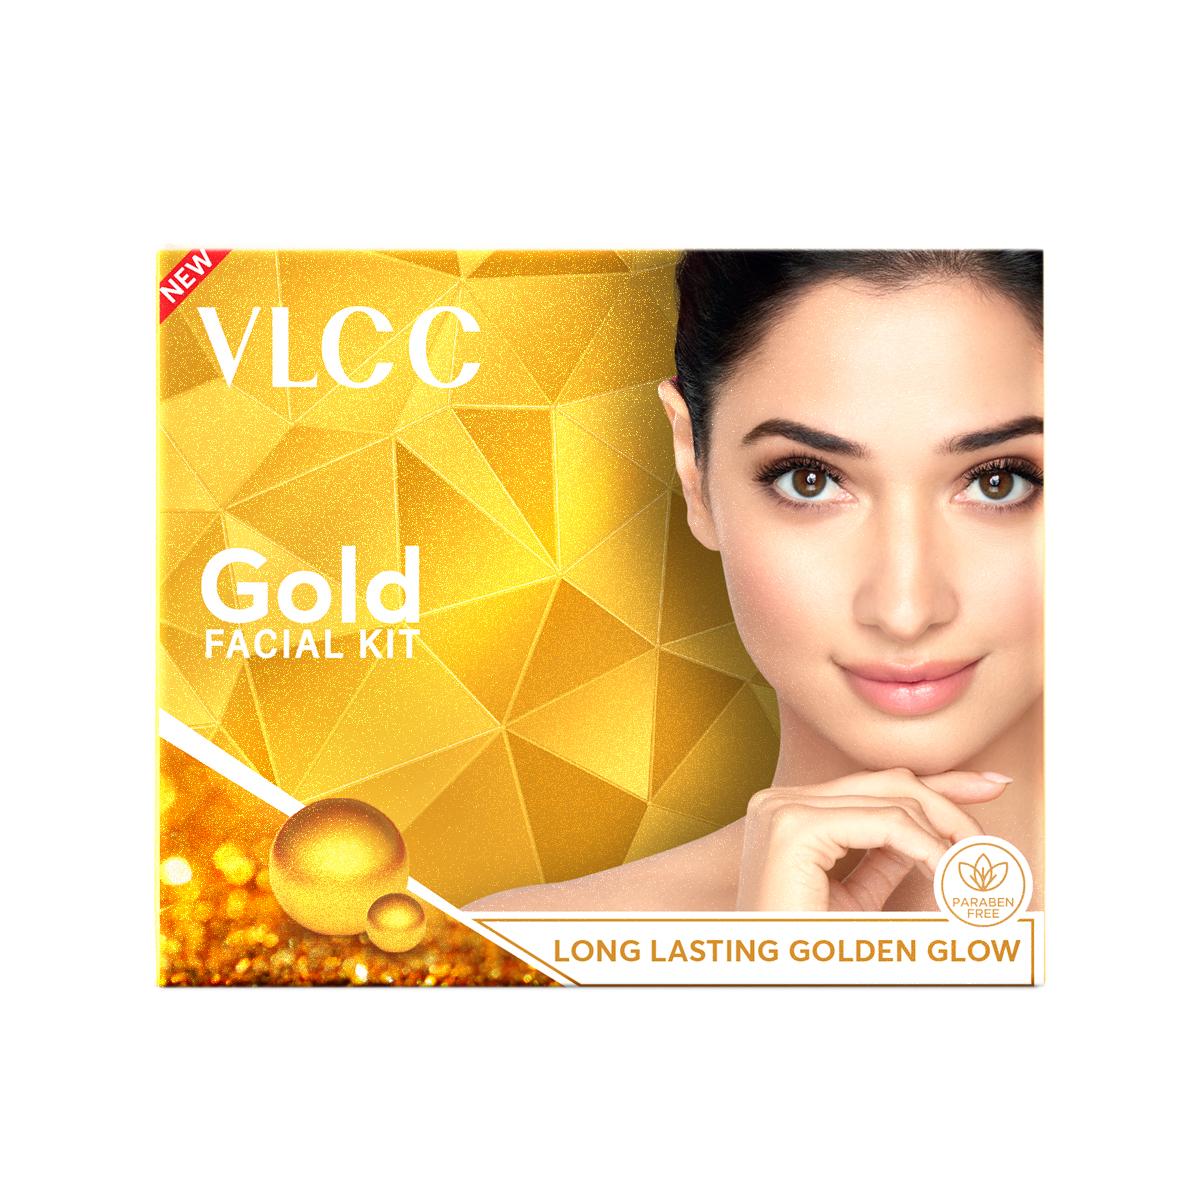 VLCC Gold Facial Kit - Nourish and Rejuvenate Your Skin with Pure Gold Extracts